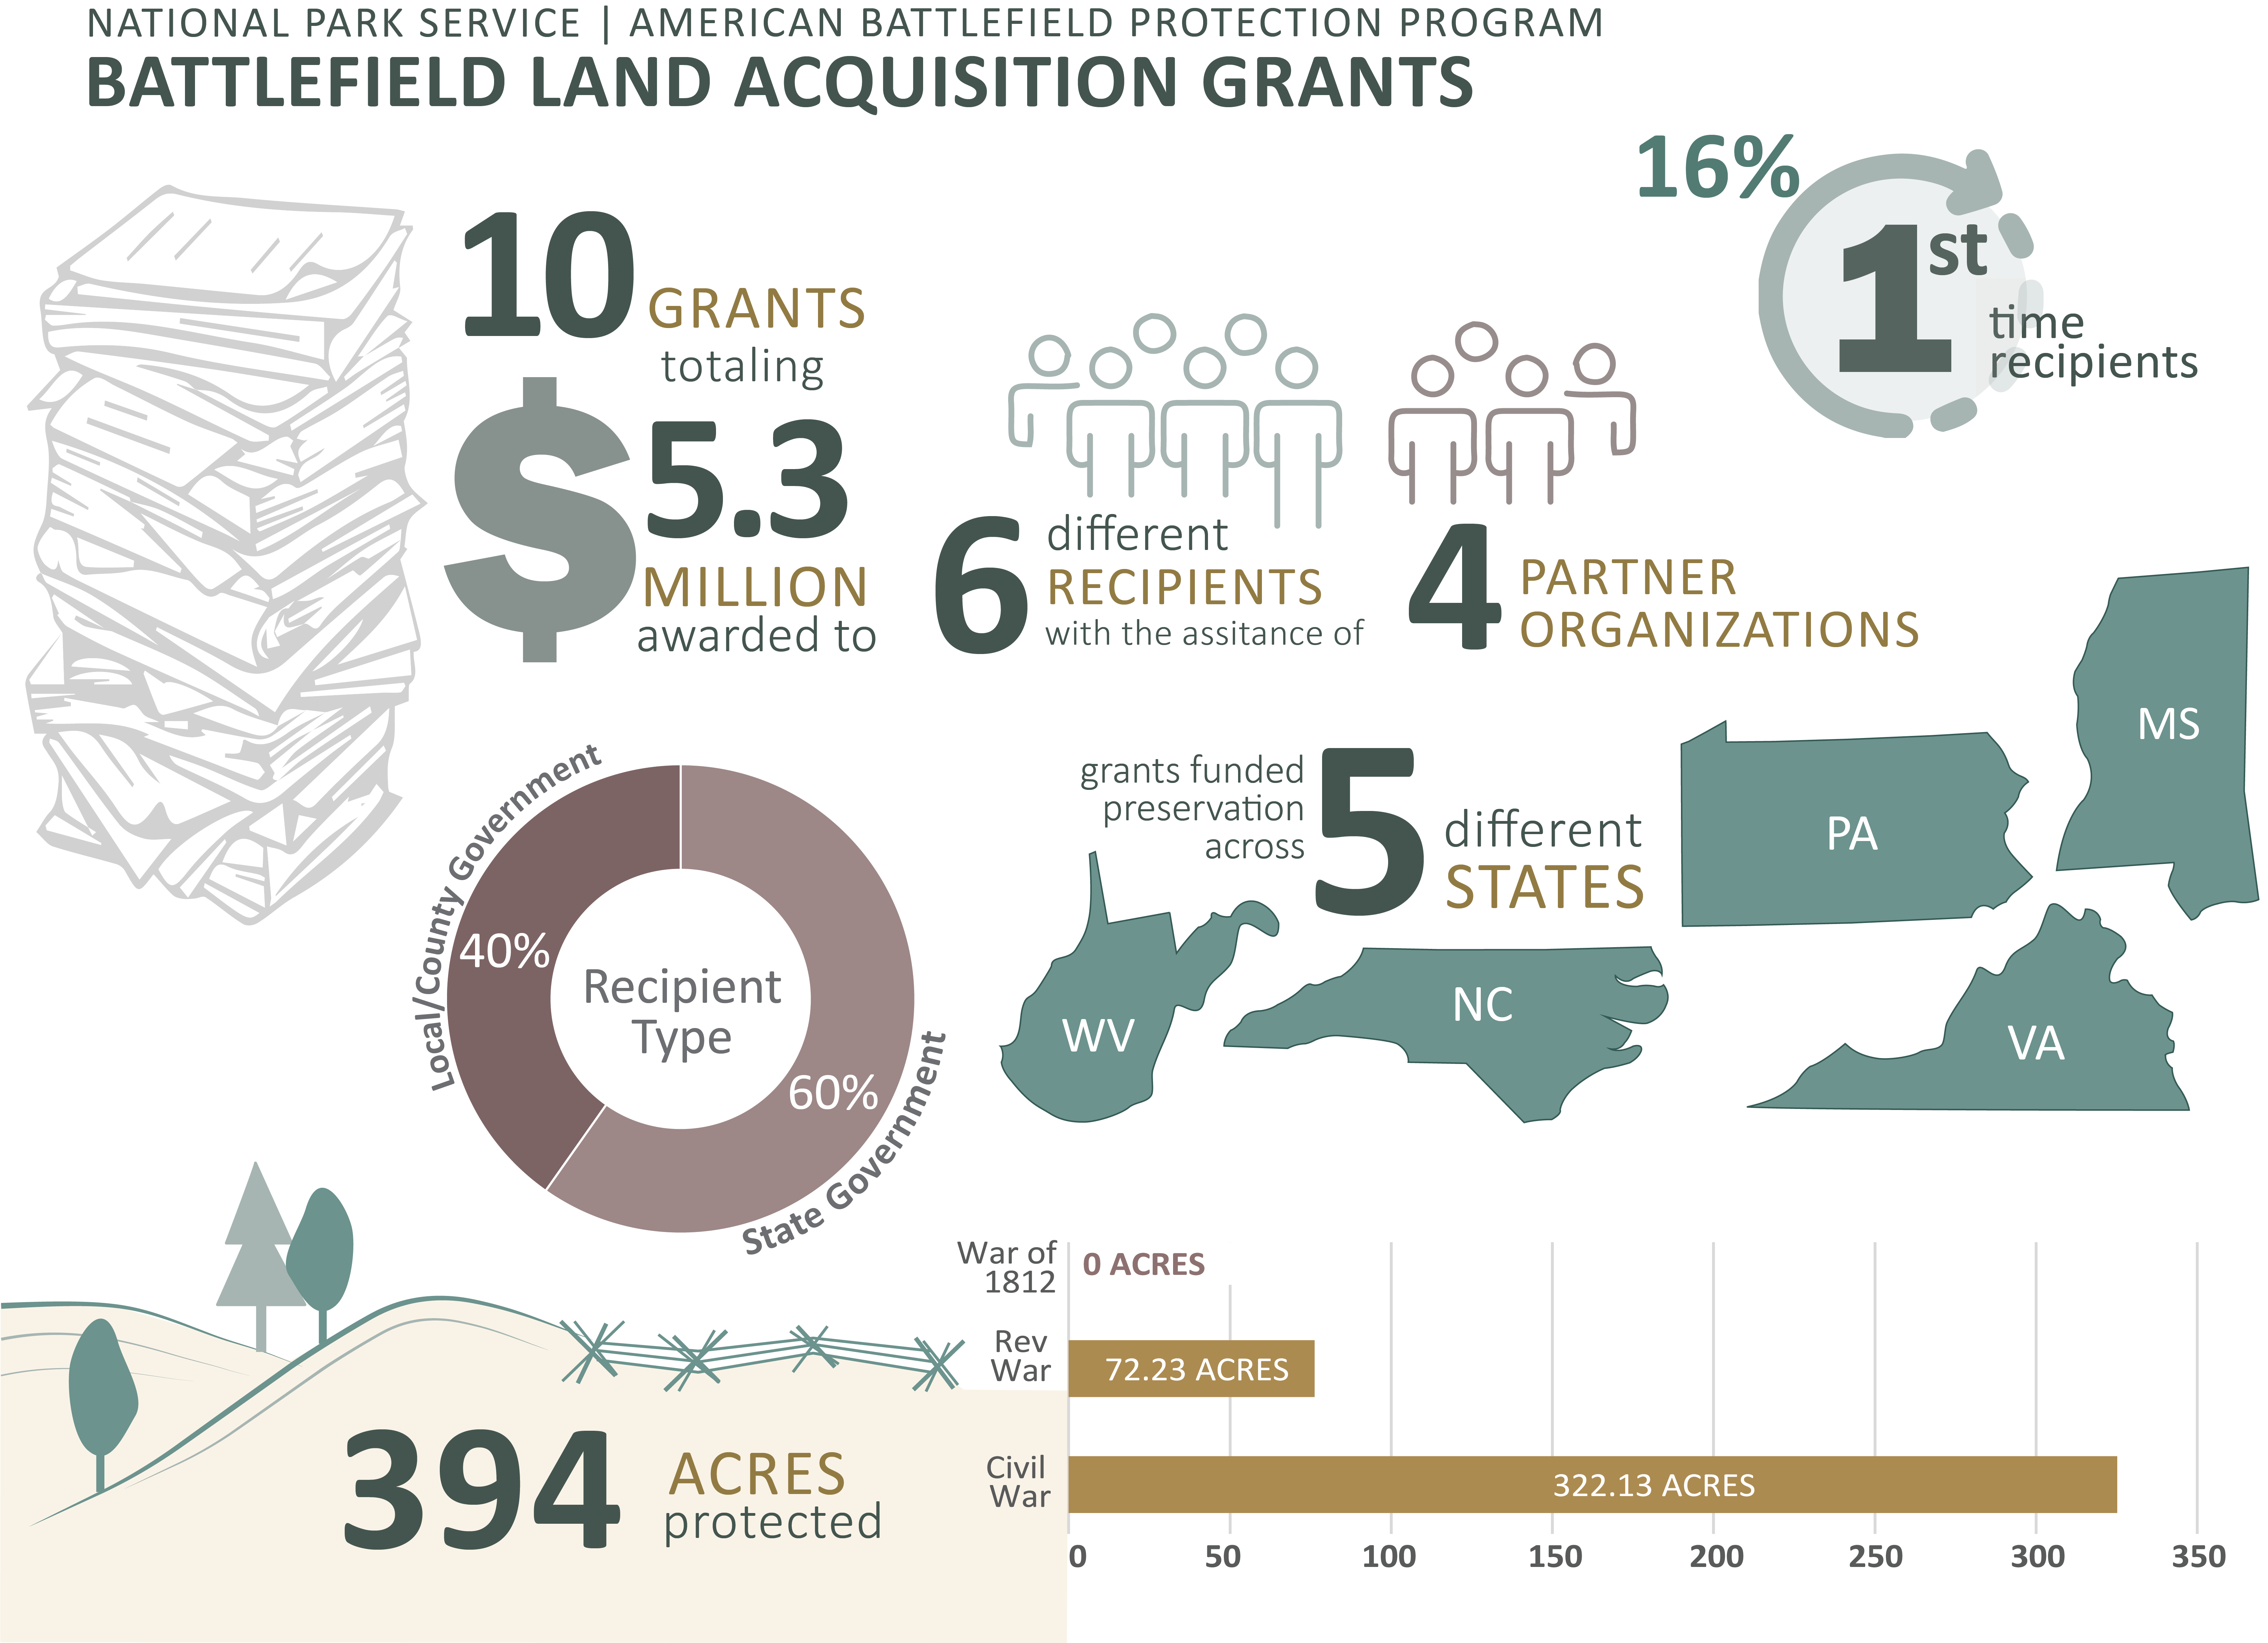 Battlefield Land Acquisition Grant stats from 2021. A total of 10 grants equaling $5.3 mill. awarded to 6 different recipients with the assistance of 4 partner organizations. 16% of them were first time recipients.